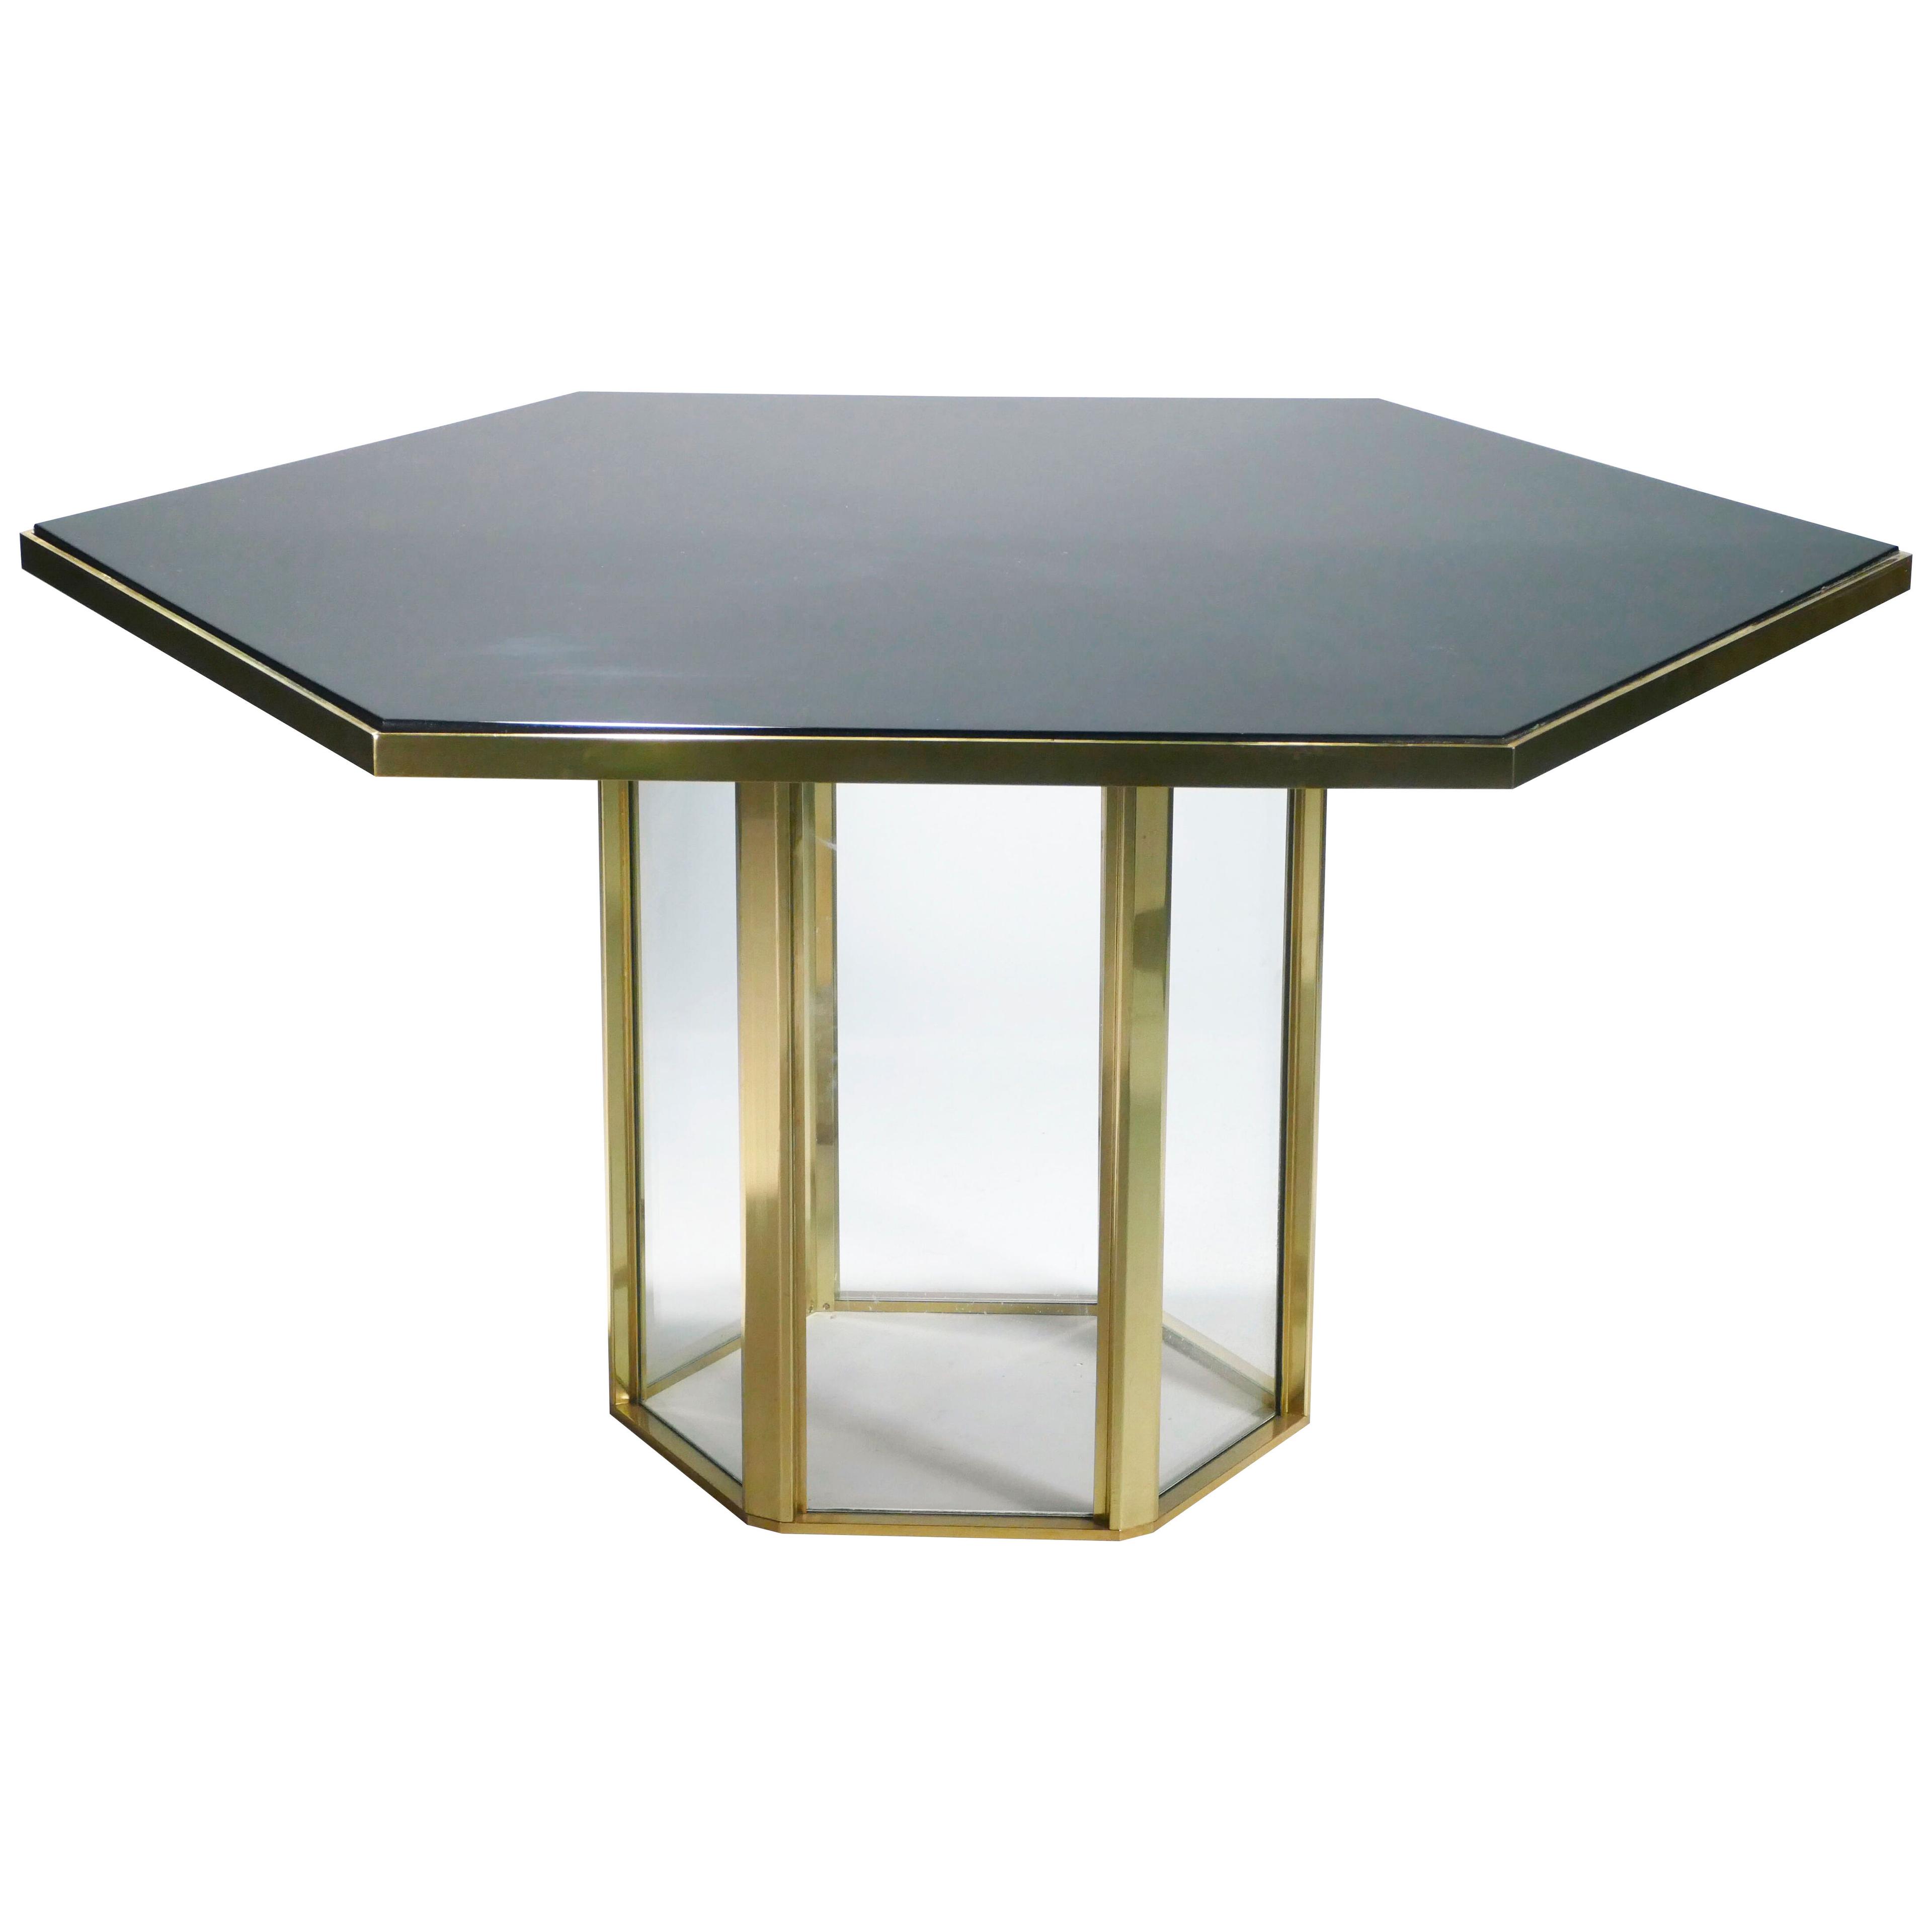 Midcentury Romeo Rega Black Lacquer Brass and Glass Dining Table, 1970s